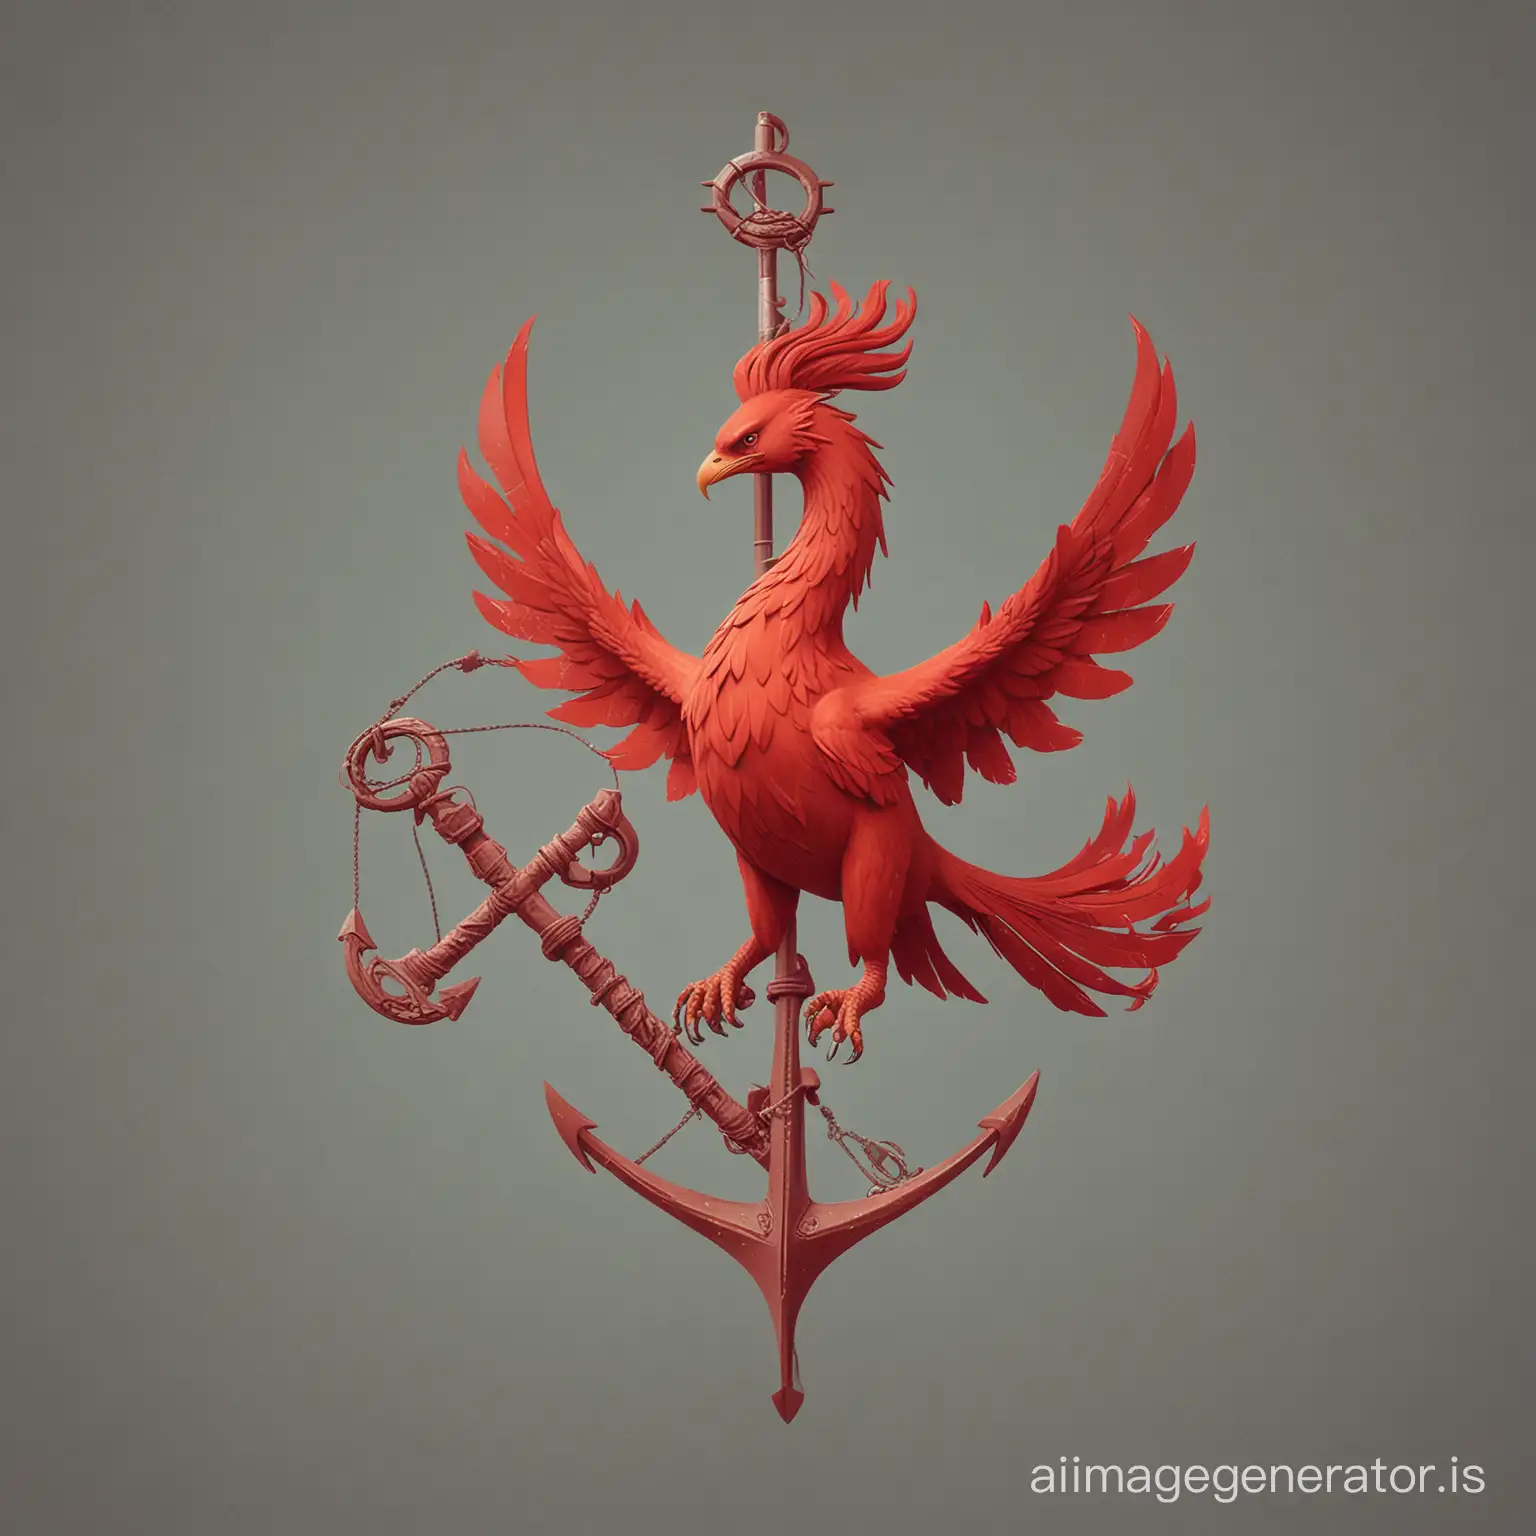 A minimalistic red phoenix holding an anchor